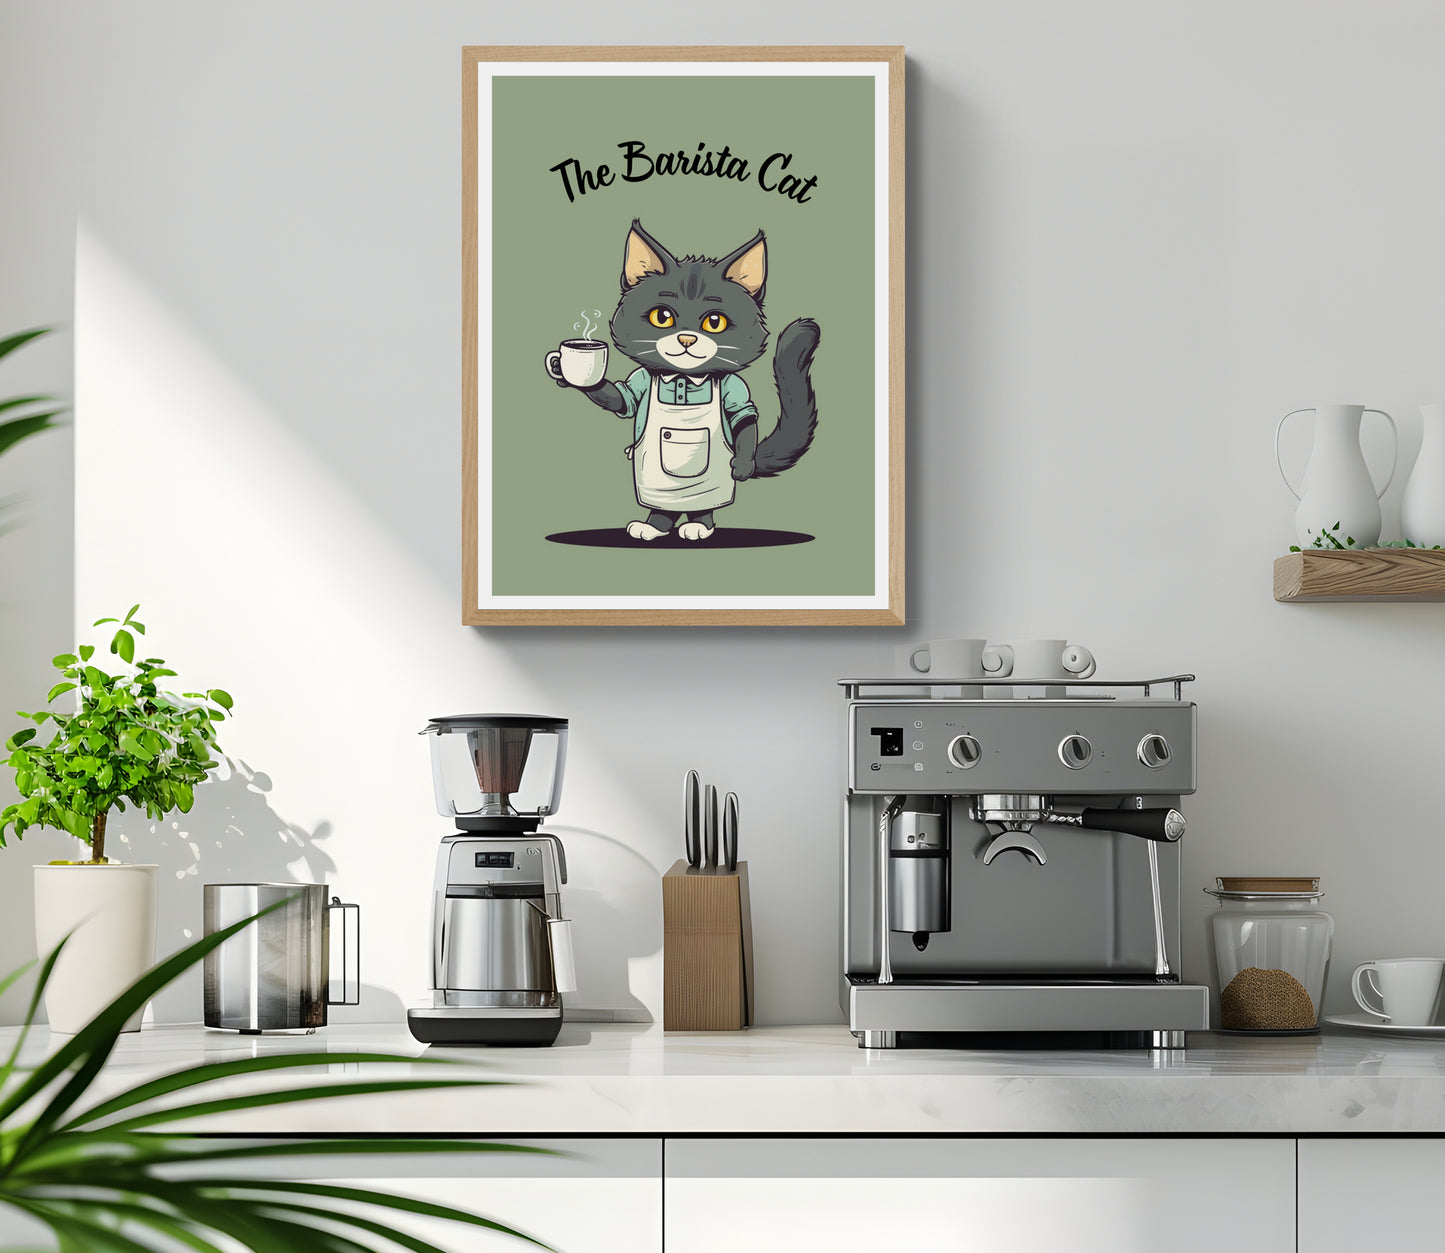 Barista Cat by Coffee Couture